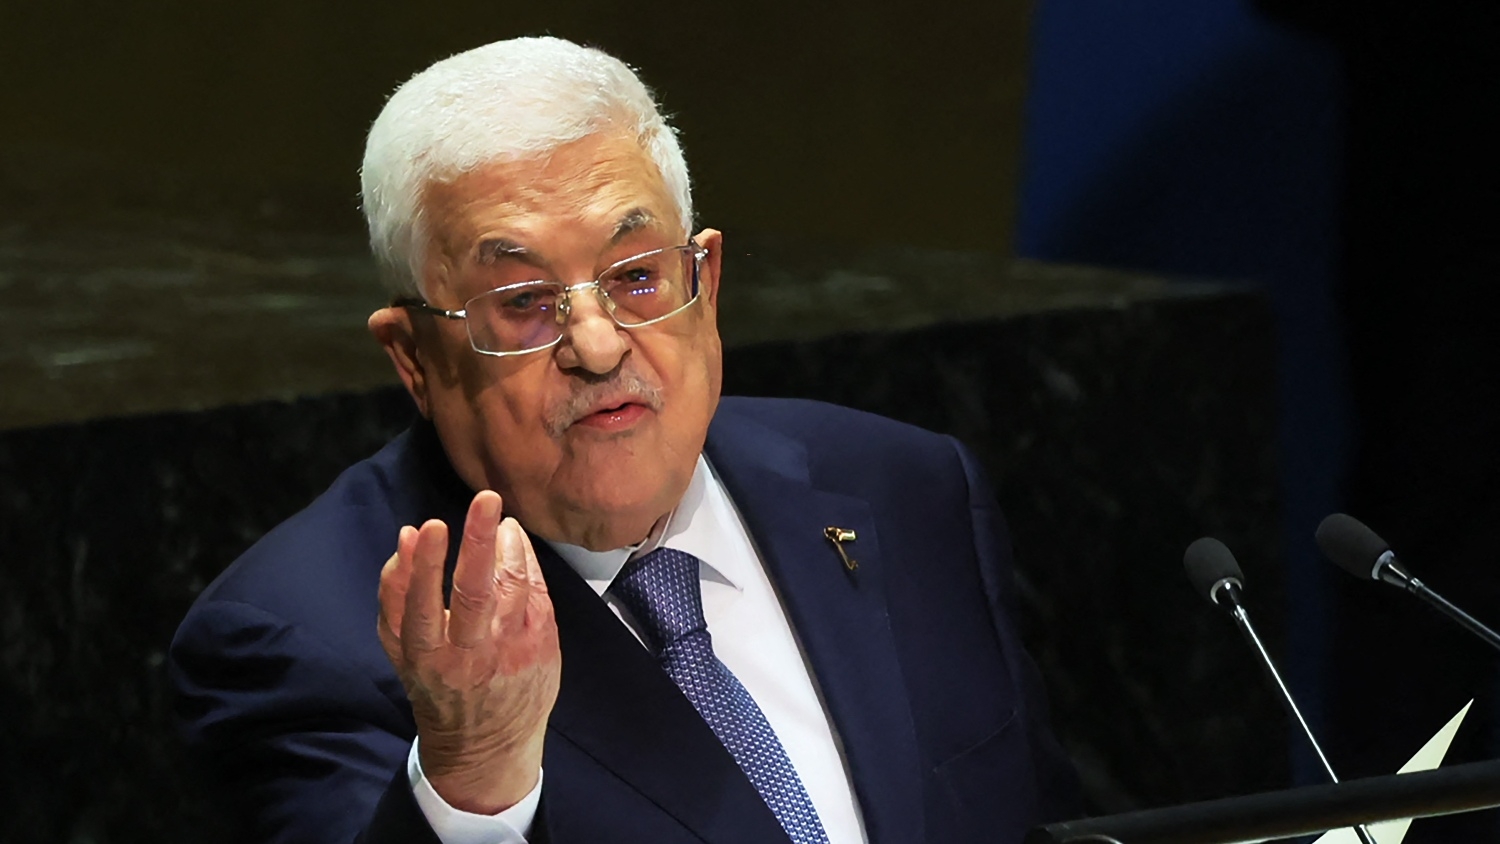 Palestinian Authority President Mahmoud Abbas speaks during the United Nations General Assembly at the United Nations headquarters on 21 September 2023 in New York City.